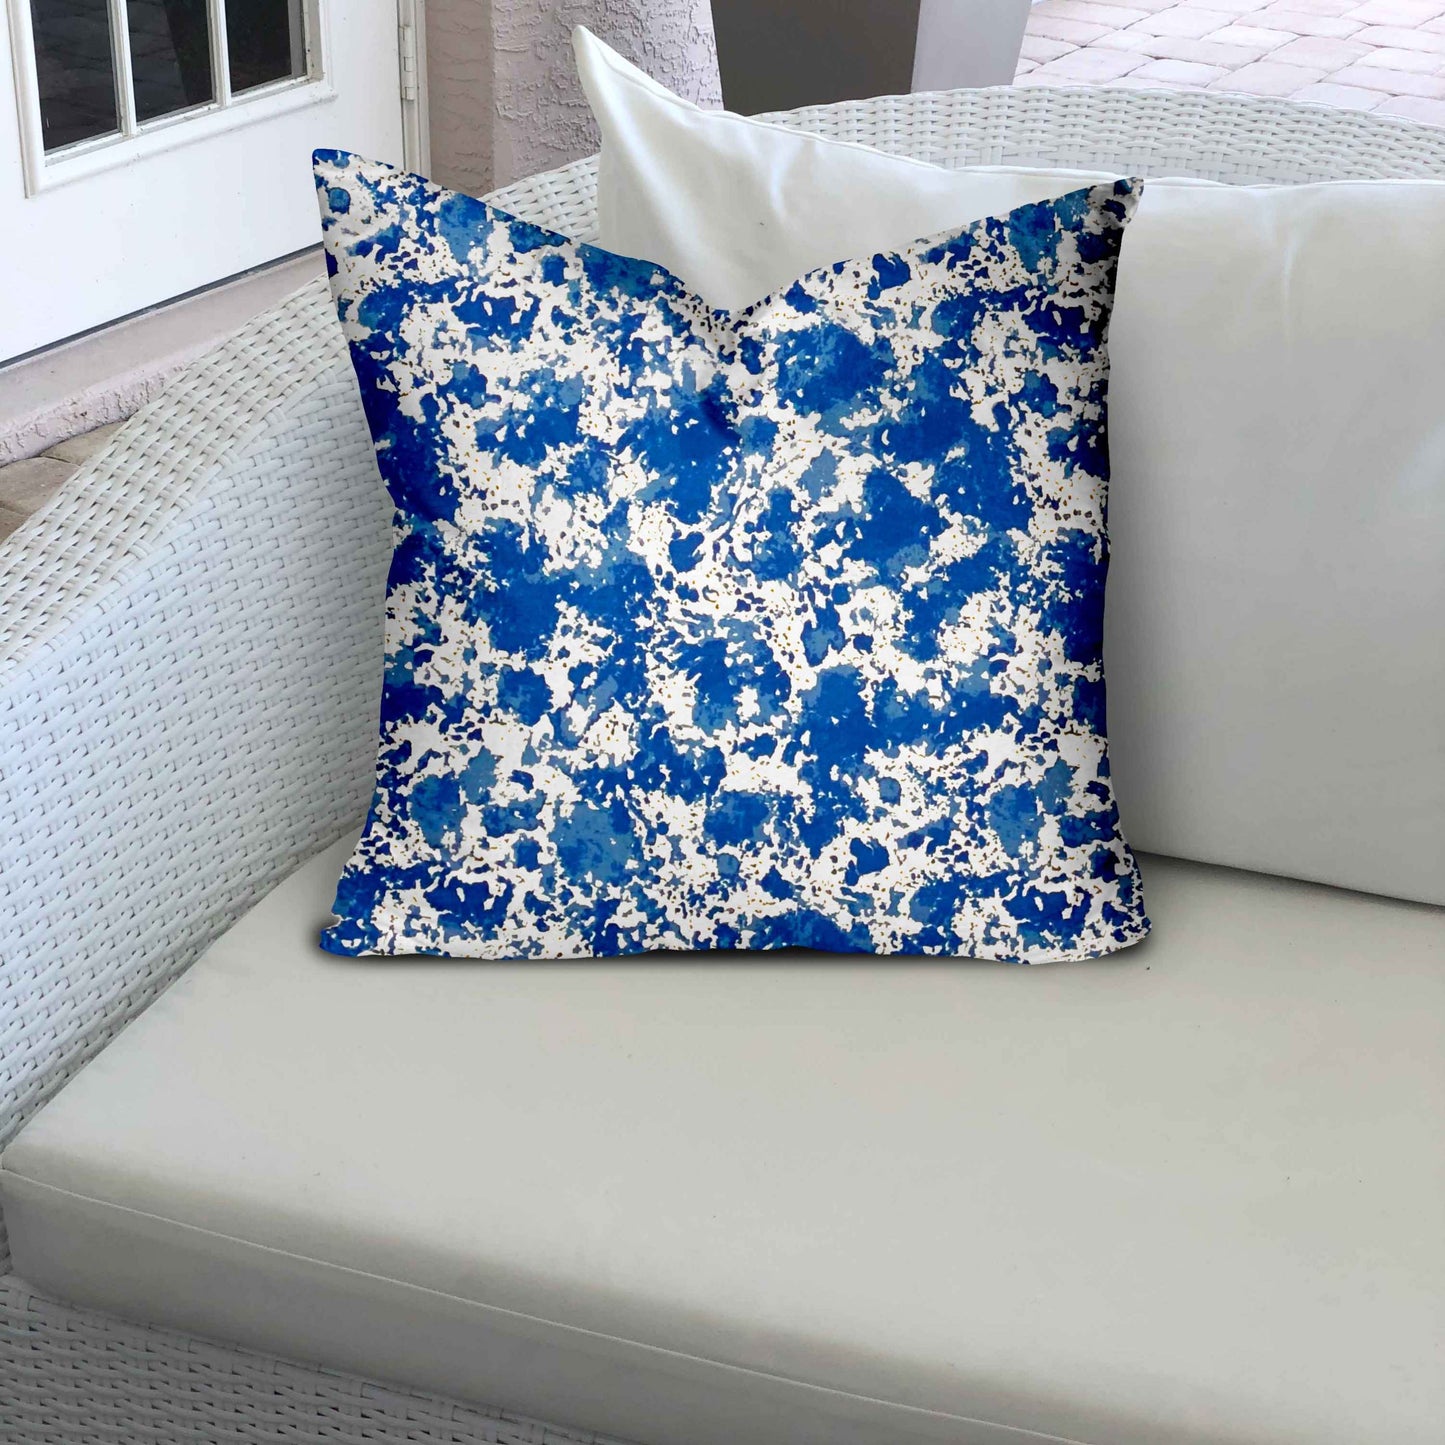 SANDY Indoor/Outdoor Soft Royal Pillow, Envelope Cover Only, 17x17